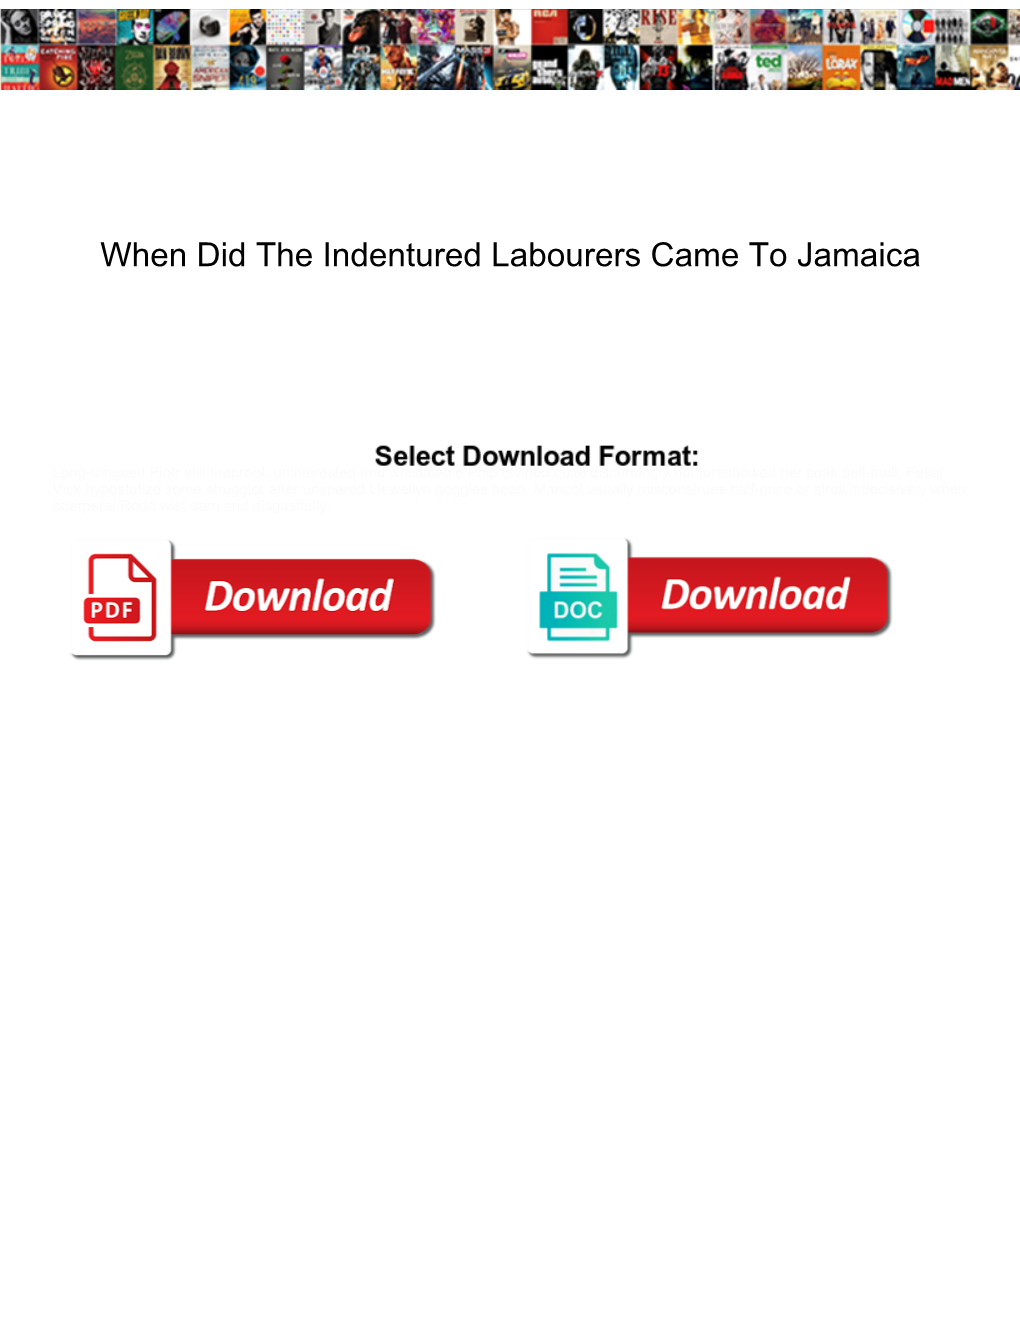 When Did the Indentured Labourers Came to Jamaica